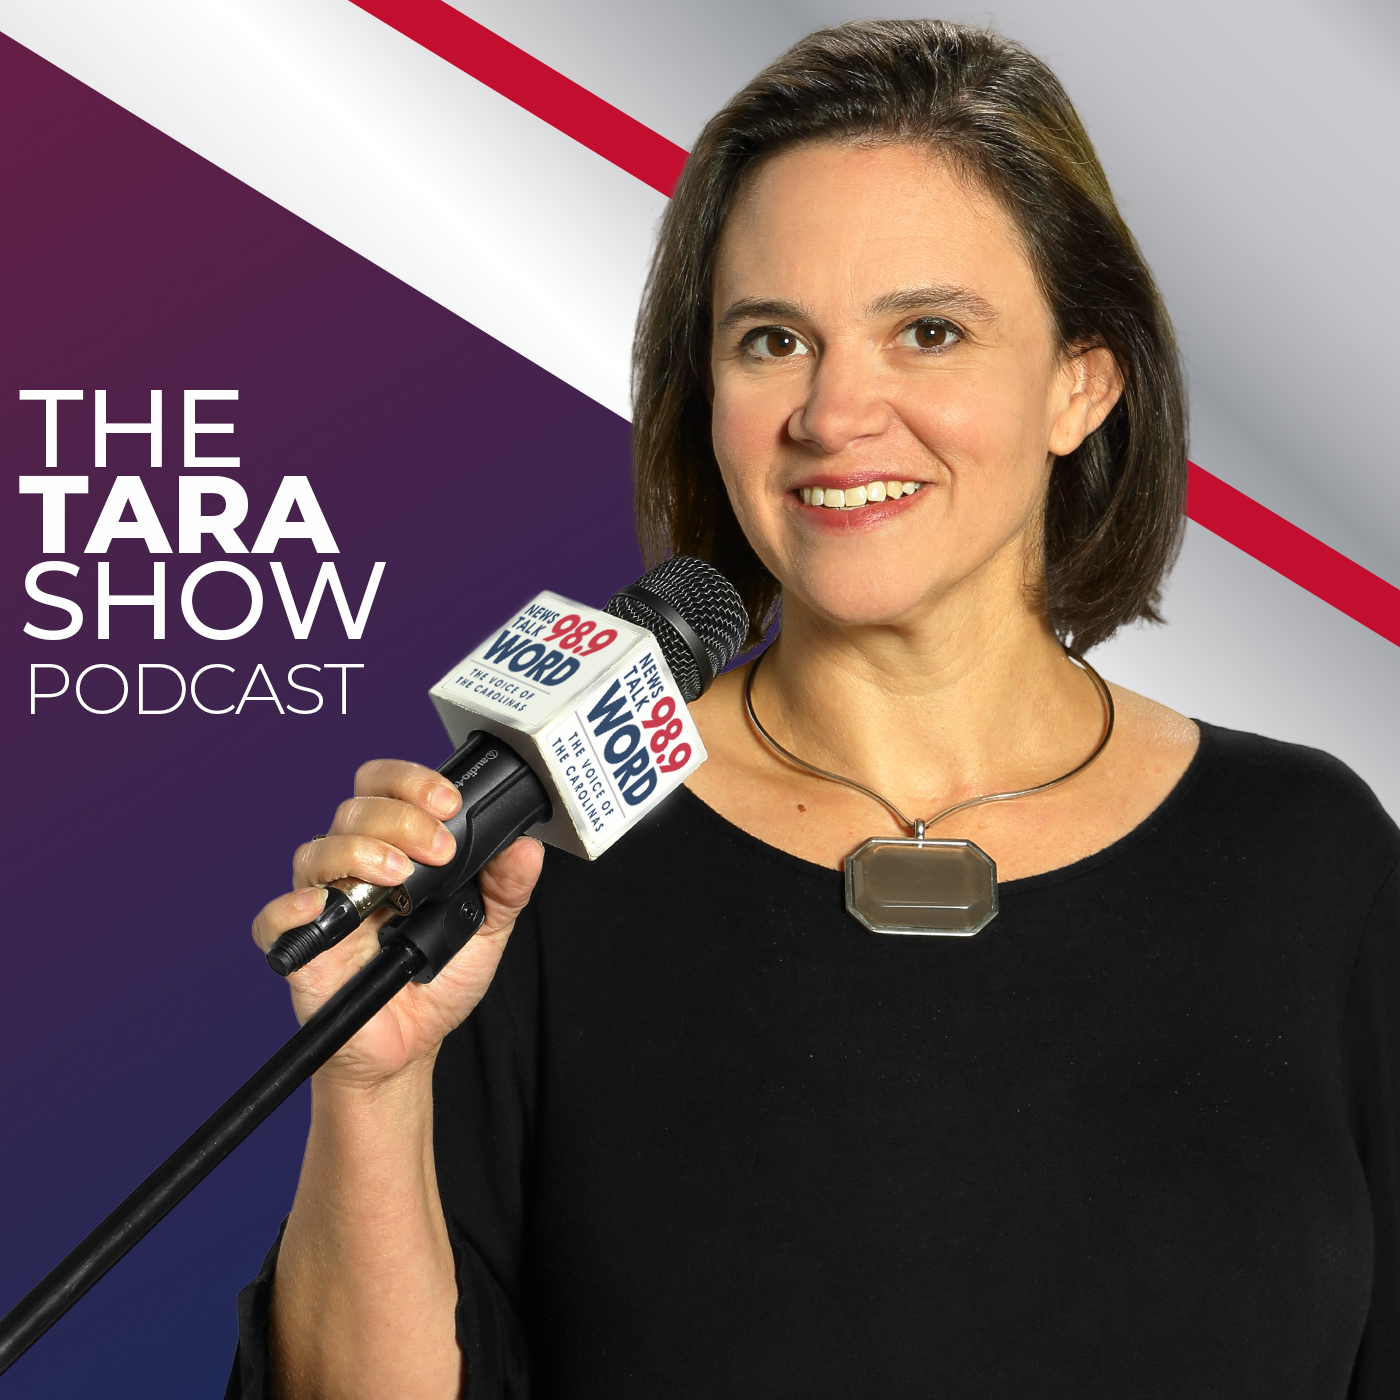 Hour 2: The Tara Show - “Tajikistani Border Crossings” “The Reality of an Honest Campaign” “Theories on Trump’s VP Picks” “Election Day” 